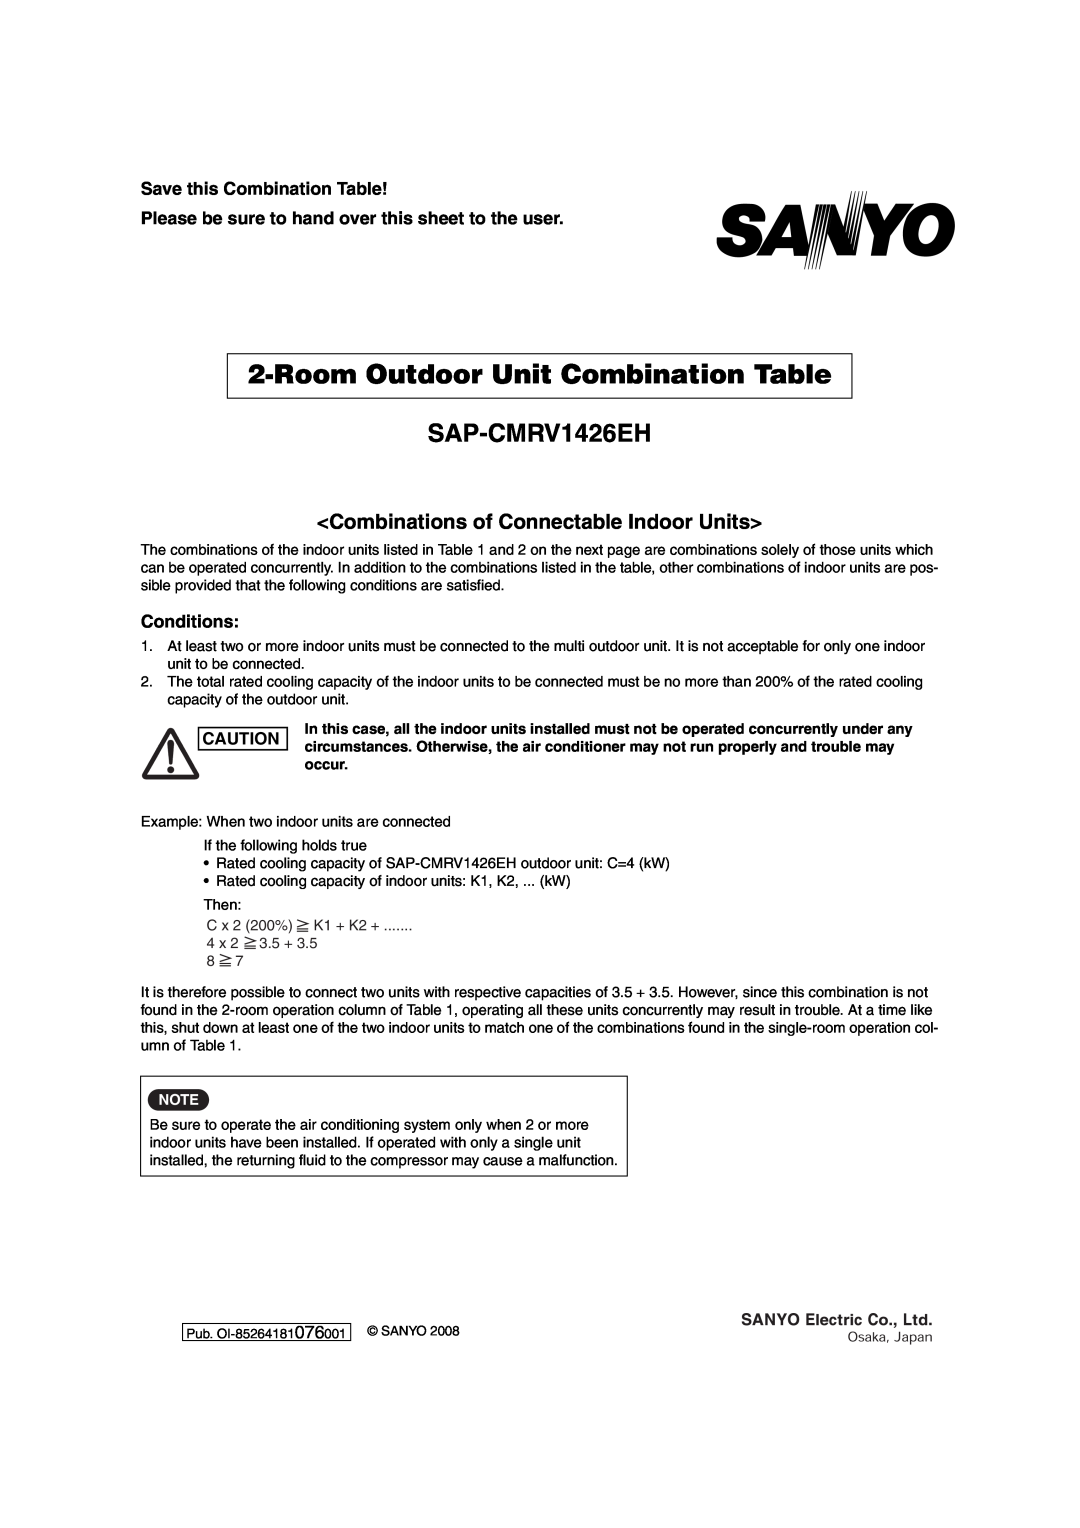 Sanyo SAP-CMRV1426EH-F, SAP-CMRV1926EH RoomOutdoor Unit Combination Table, <Combinations of Connectable Indoor Units> 